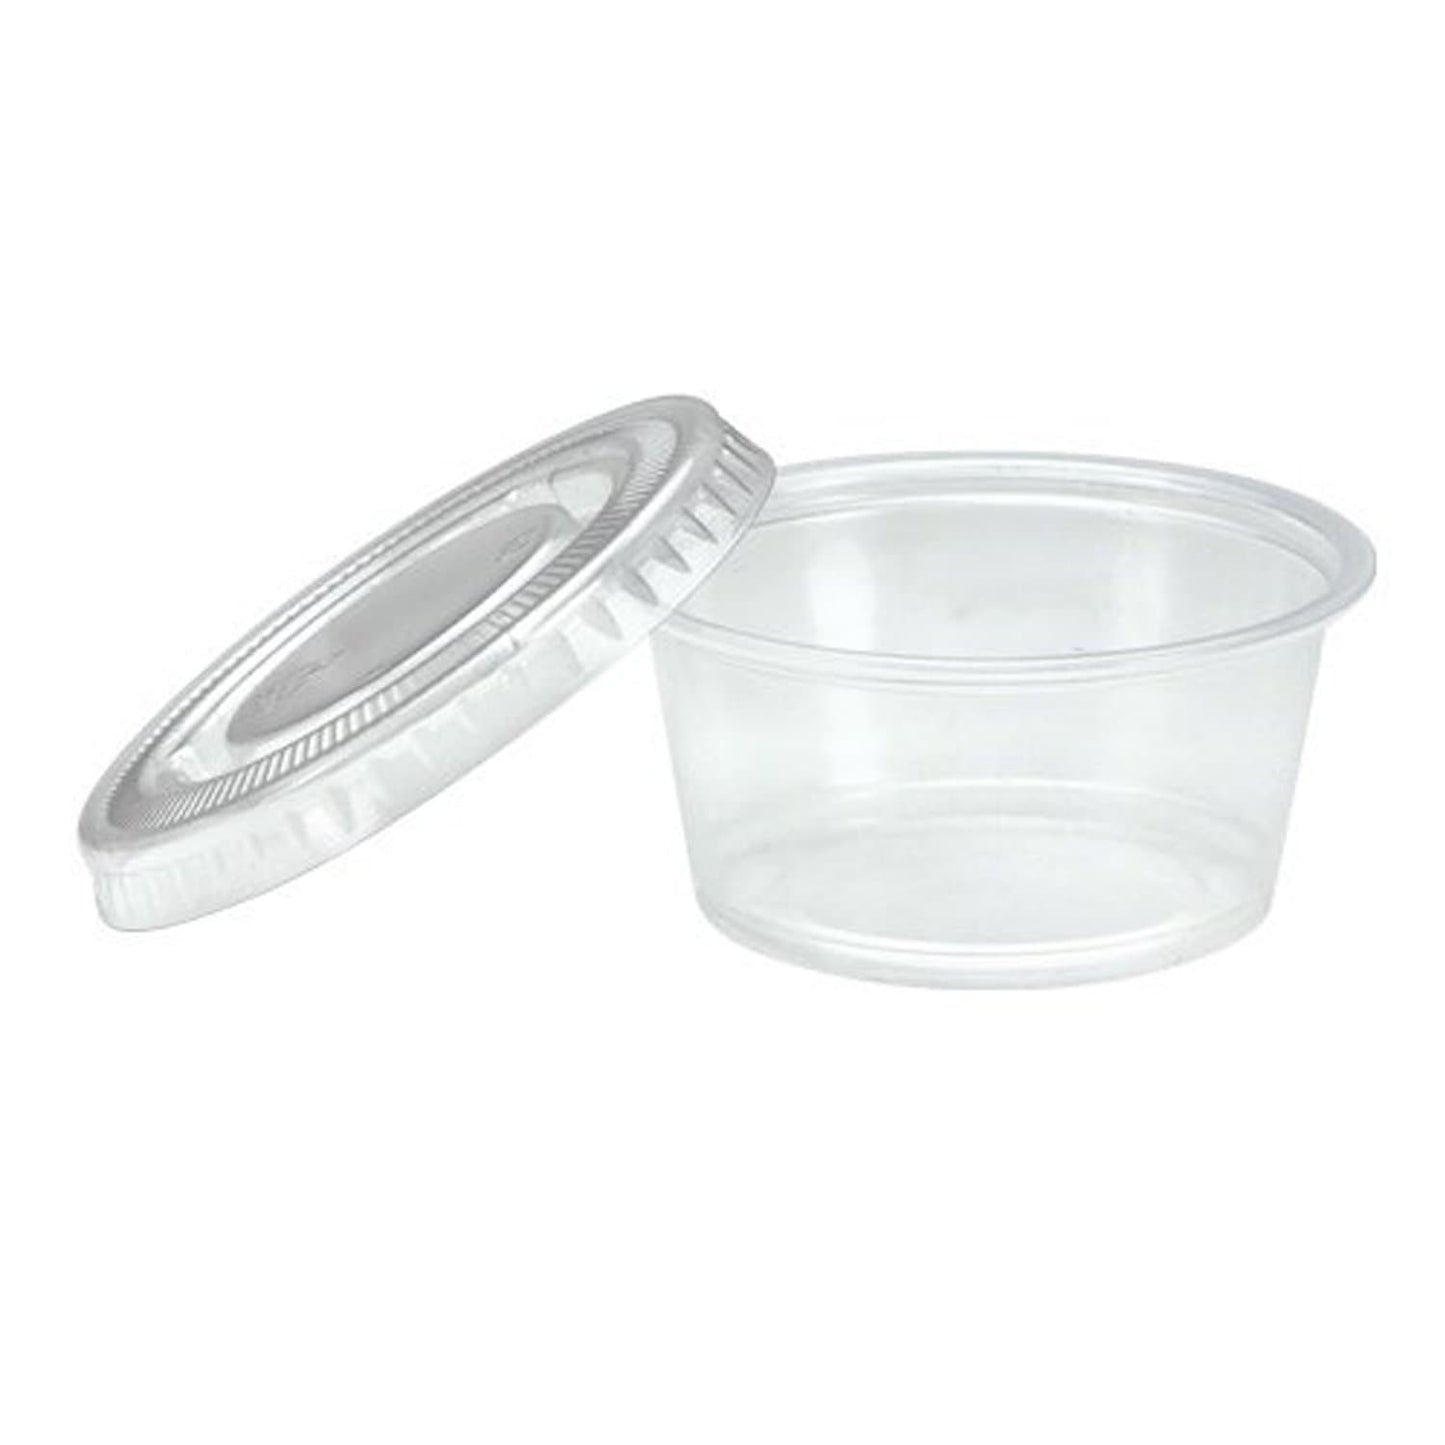 https://onlyonestopshop.com/cdn/shop/products/Nicole-Home-Collection-Portion-Cups-with-Lids-Clear-2-oz-50Ct-Nicole-Collection-1603927057.jpg?v=1609245267&width=1445